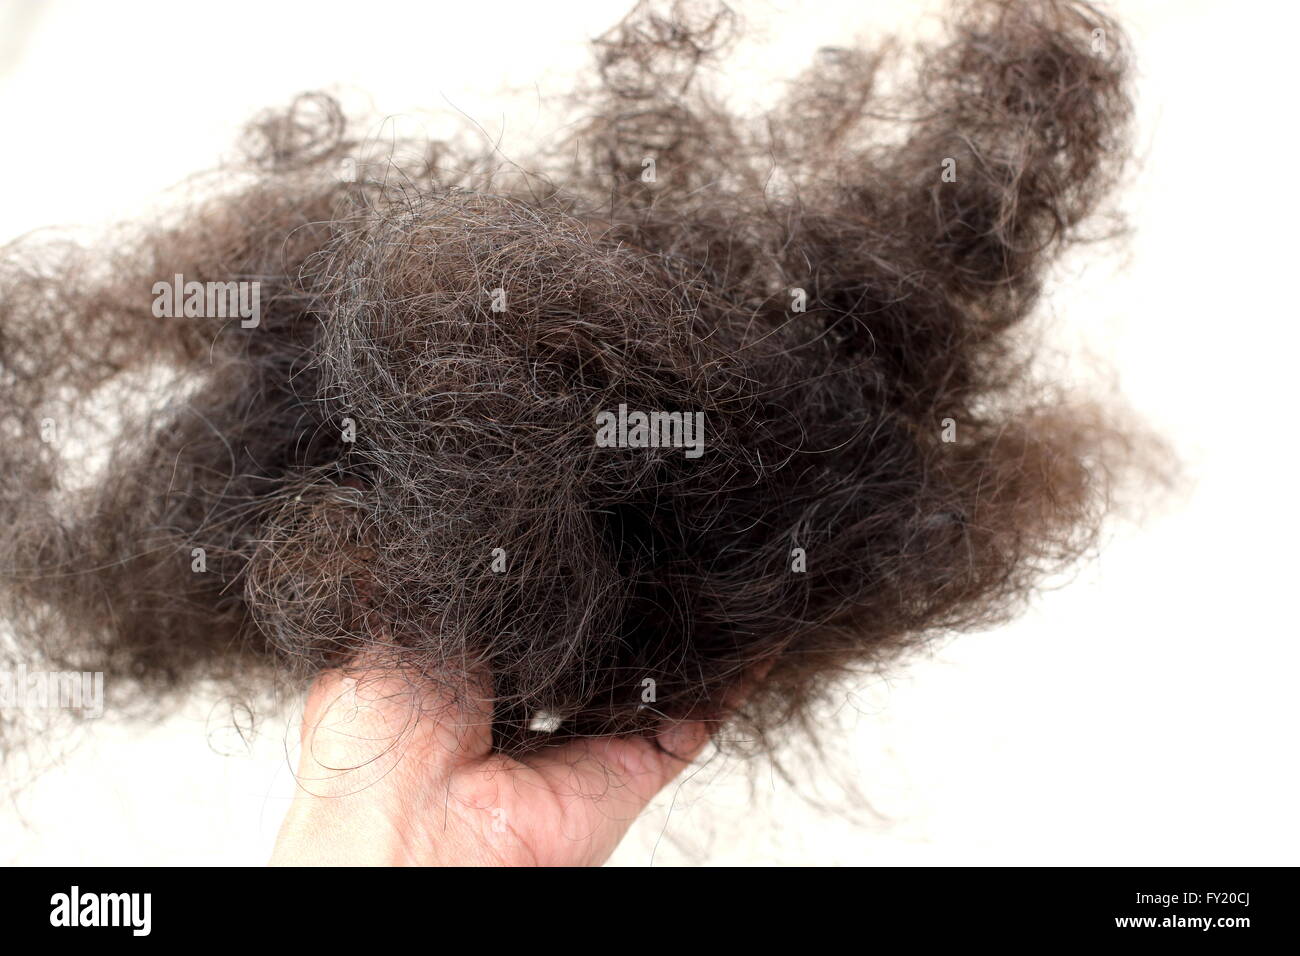 Holding loss hair in hand Stock Photo